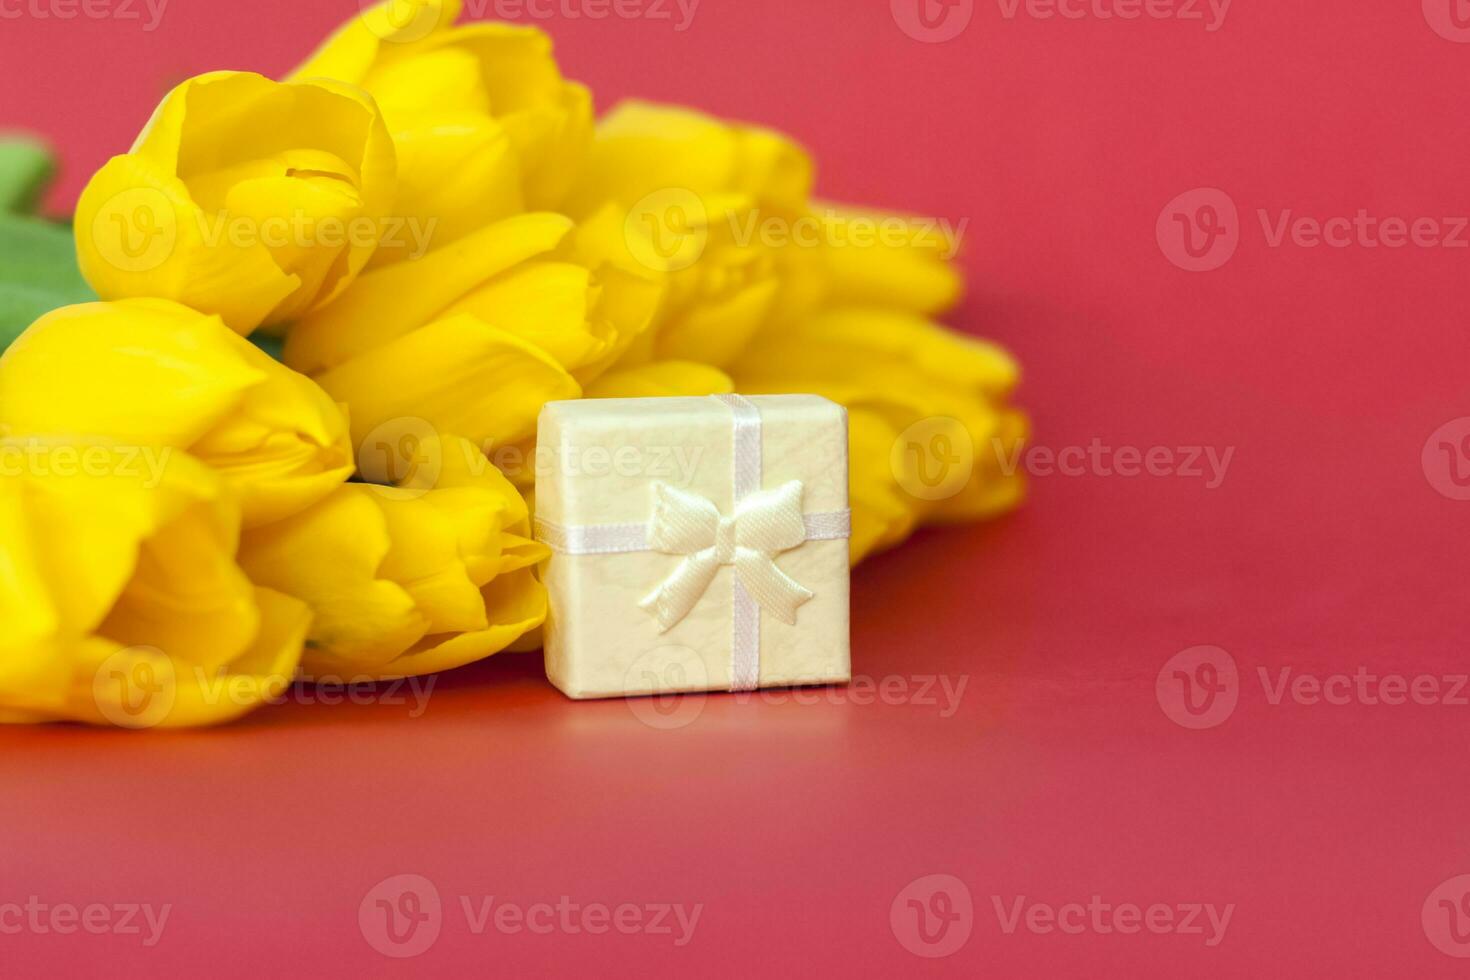 A bouquet of fresh yellow tulips on a red background. A small gift box next to the tulips. Spring flowers. The concept of spring or holiday, March 8, International Women's Day, photo